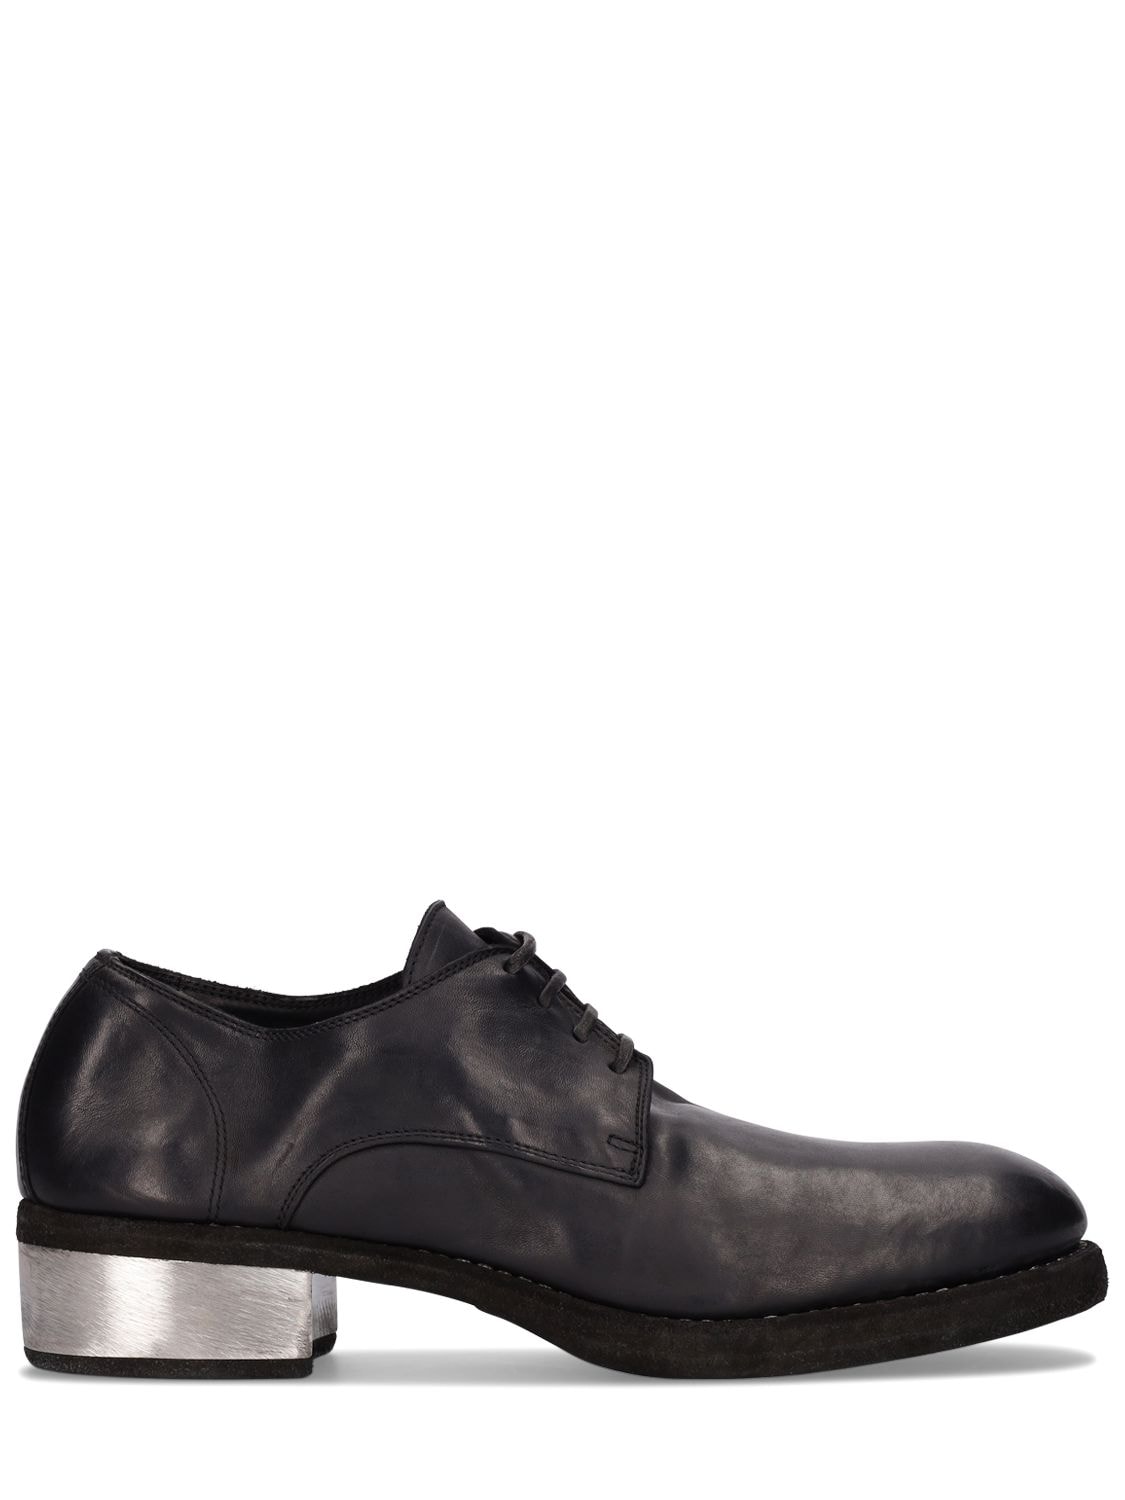 Guidi 1896 - Derby leather lace-up shoes w/metal heel - Black ...